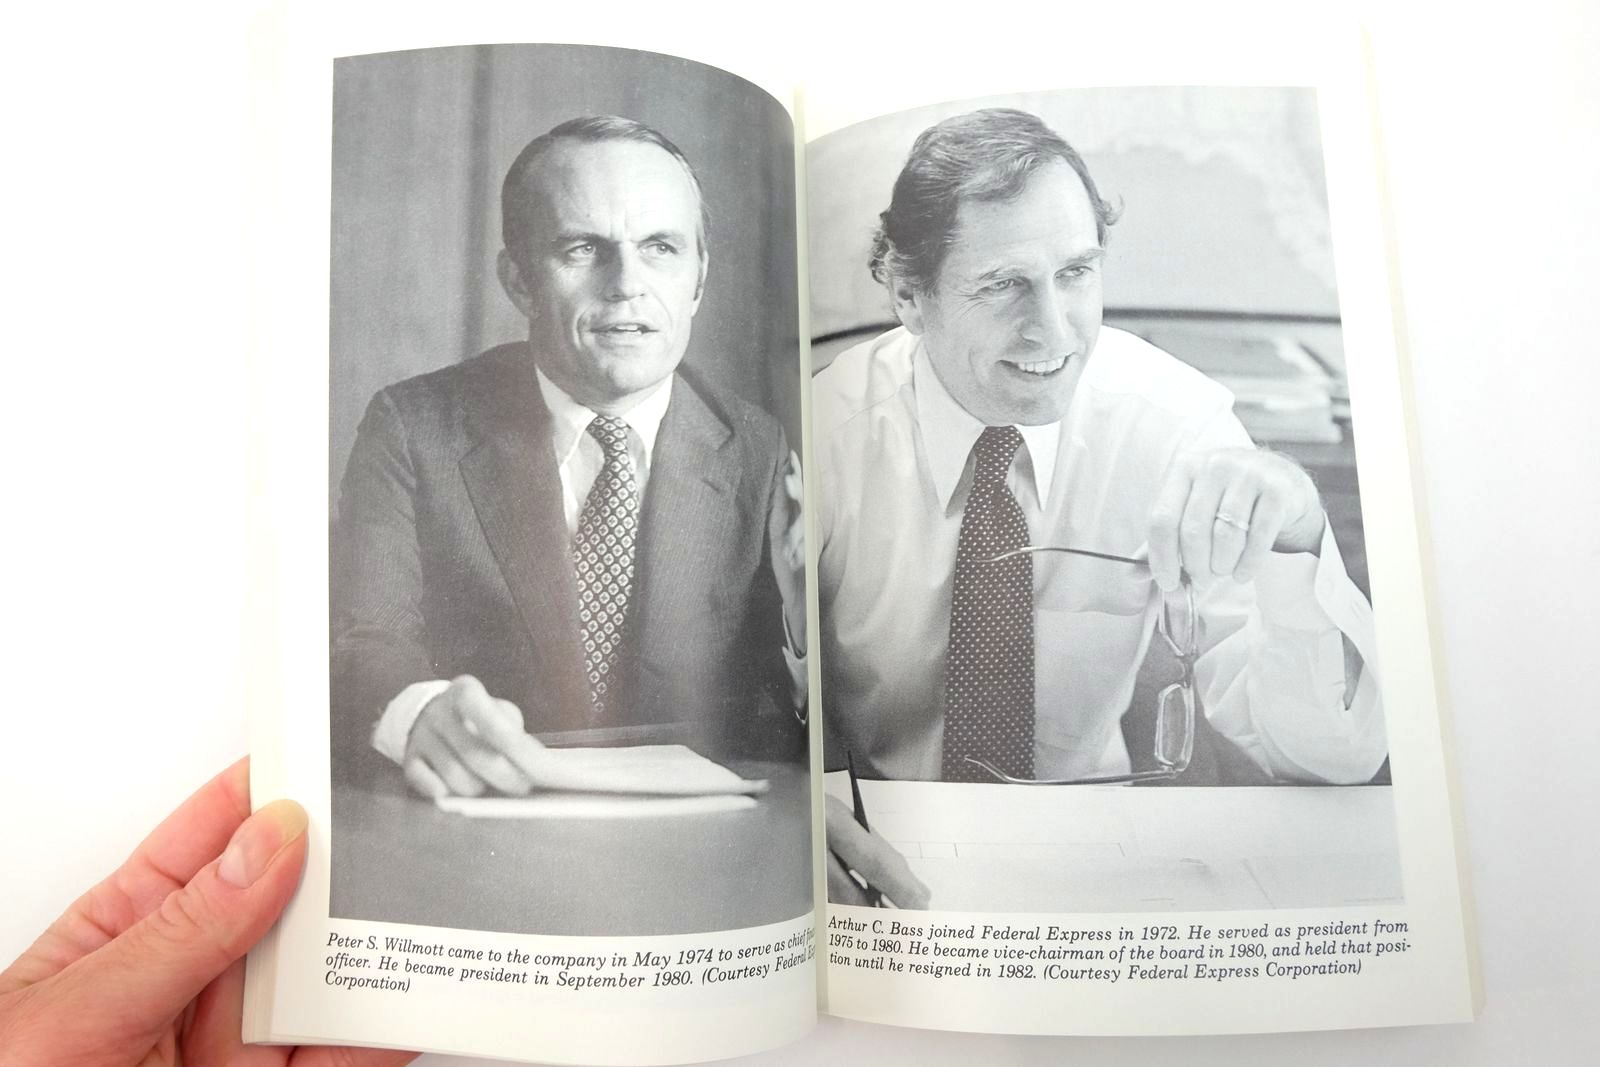 Photo of ABSOLUTELY POSITIVELY OVERNIGHT! THE UNOFFICIAL CORPORATE HISTORY OF FEDERAL EXPRESS written by Sigafoos, Robert A.
Easson, Roger R. published by St. Lukes Press (STOCK CODE: 2138413)  for sale by Stella & Rose's Books